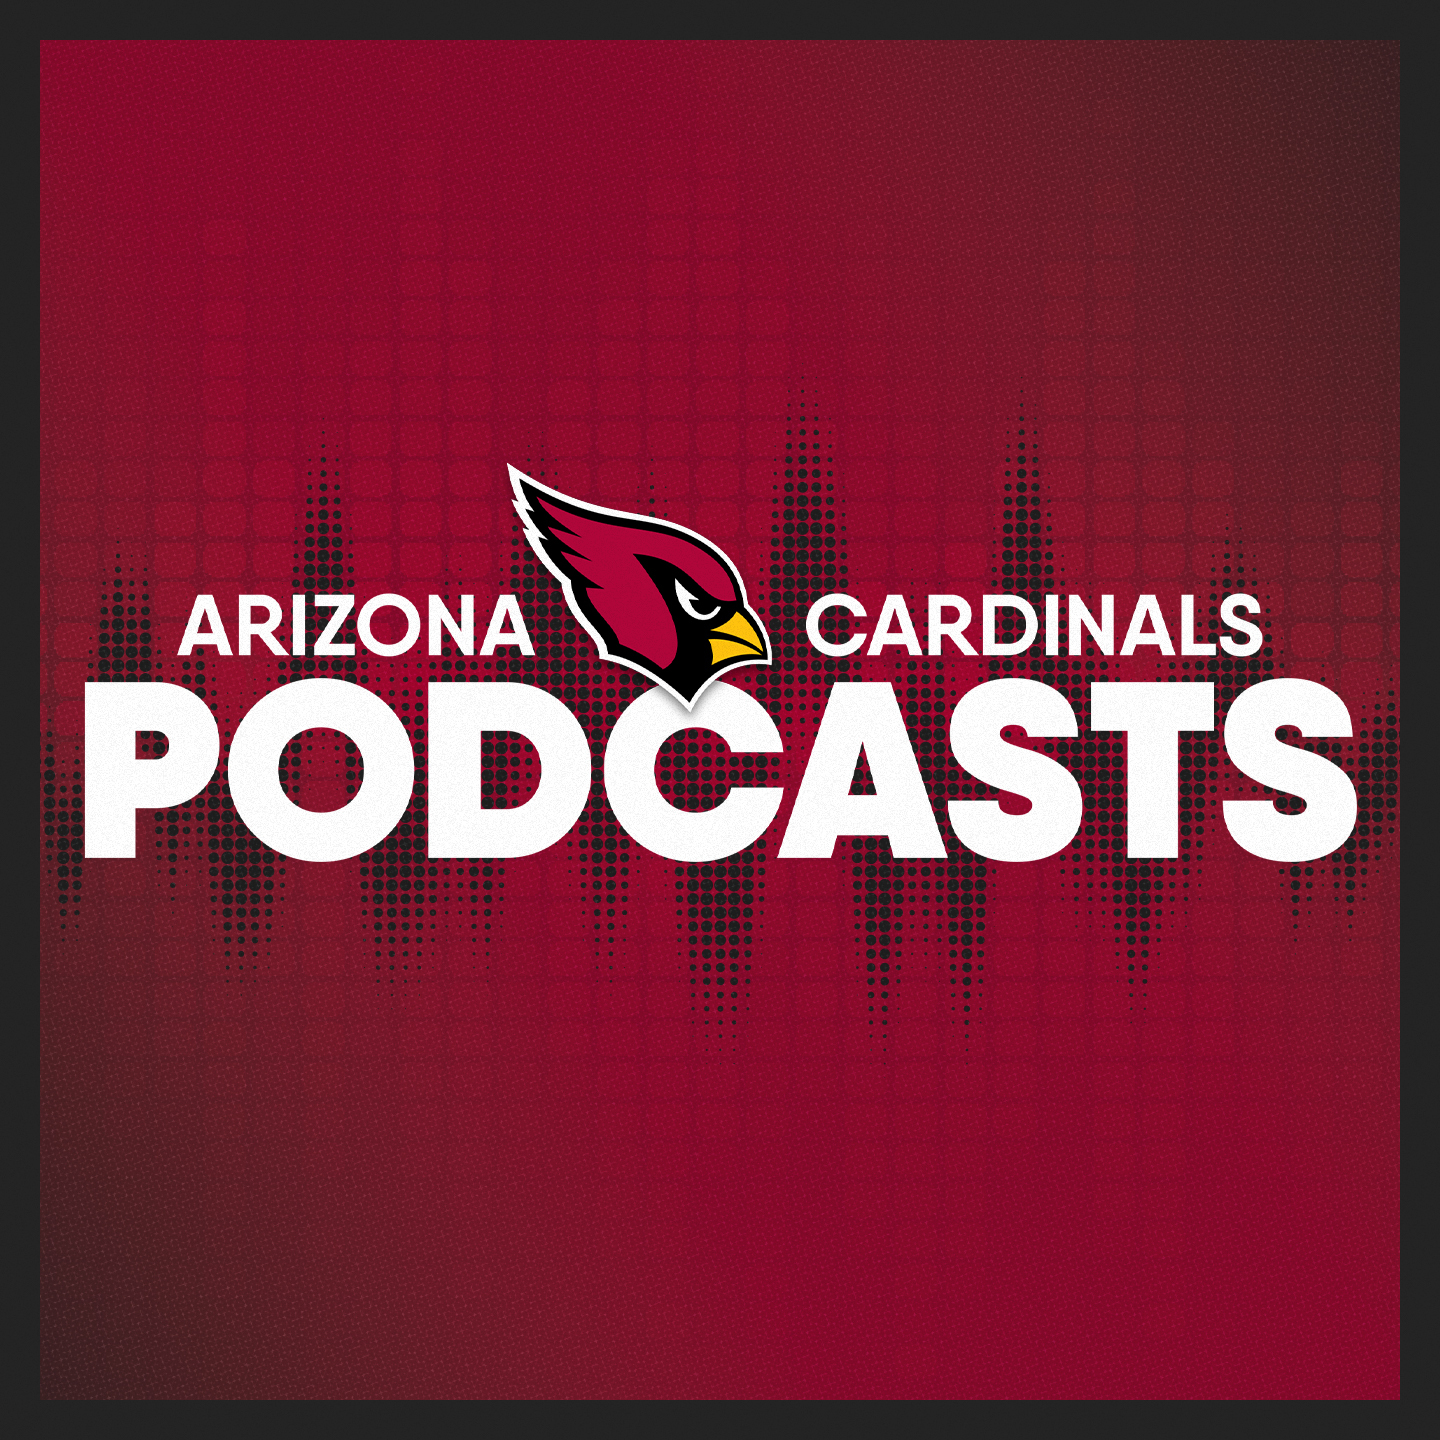 Big Red Rage - Cardinals Recharge For Stretch Run